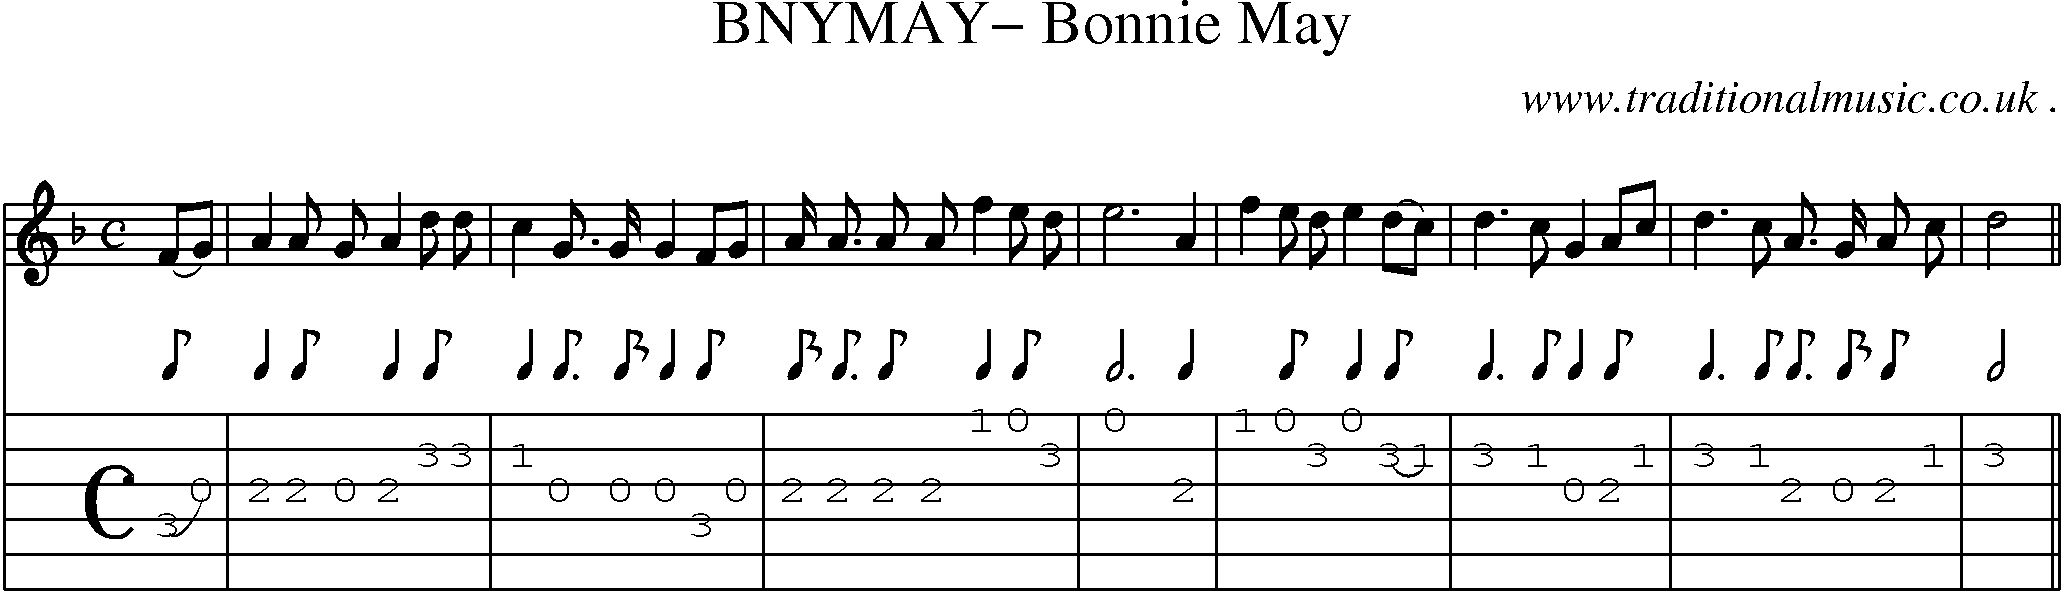 Sheet-Music and Guitar Tabs for Bonnie May